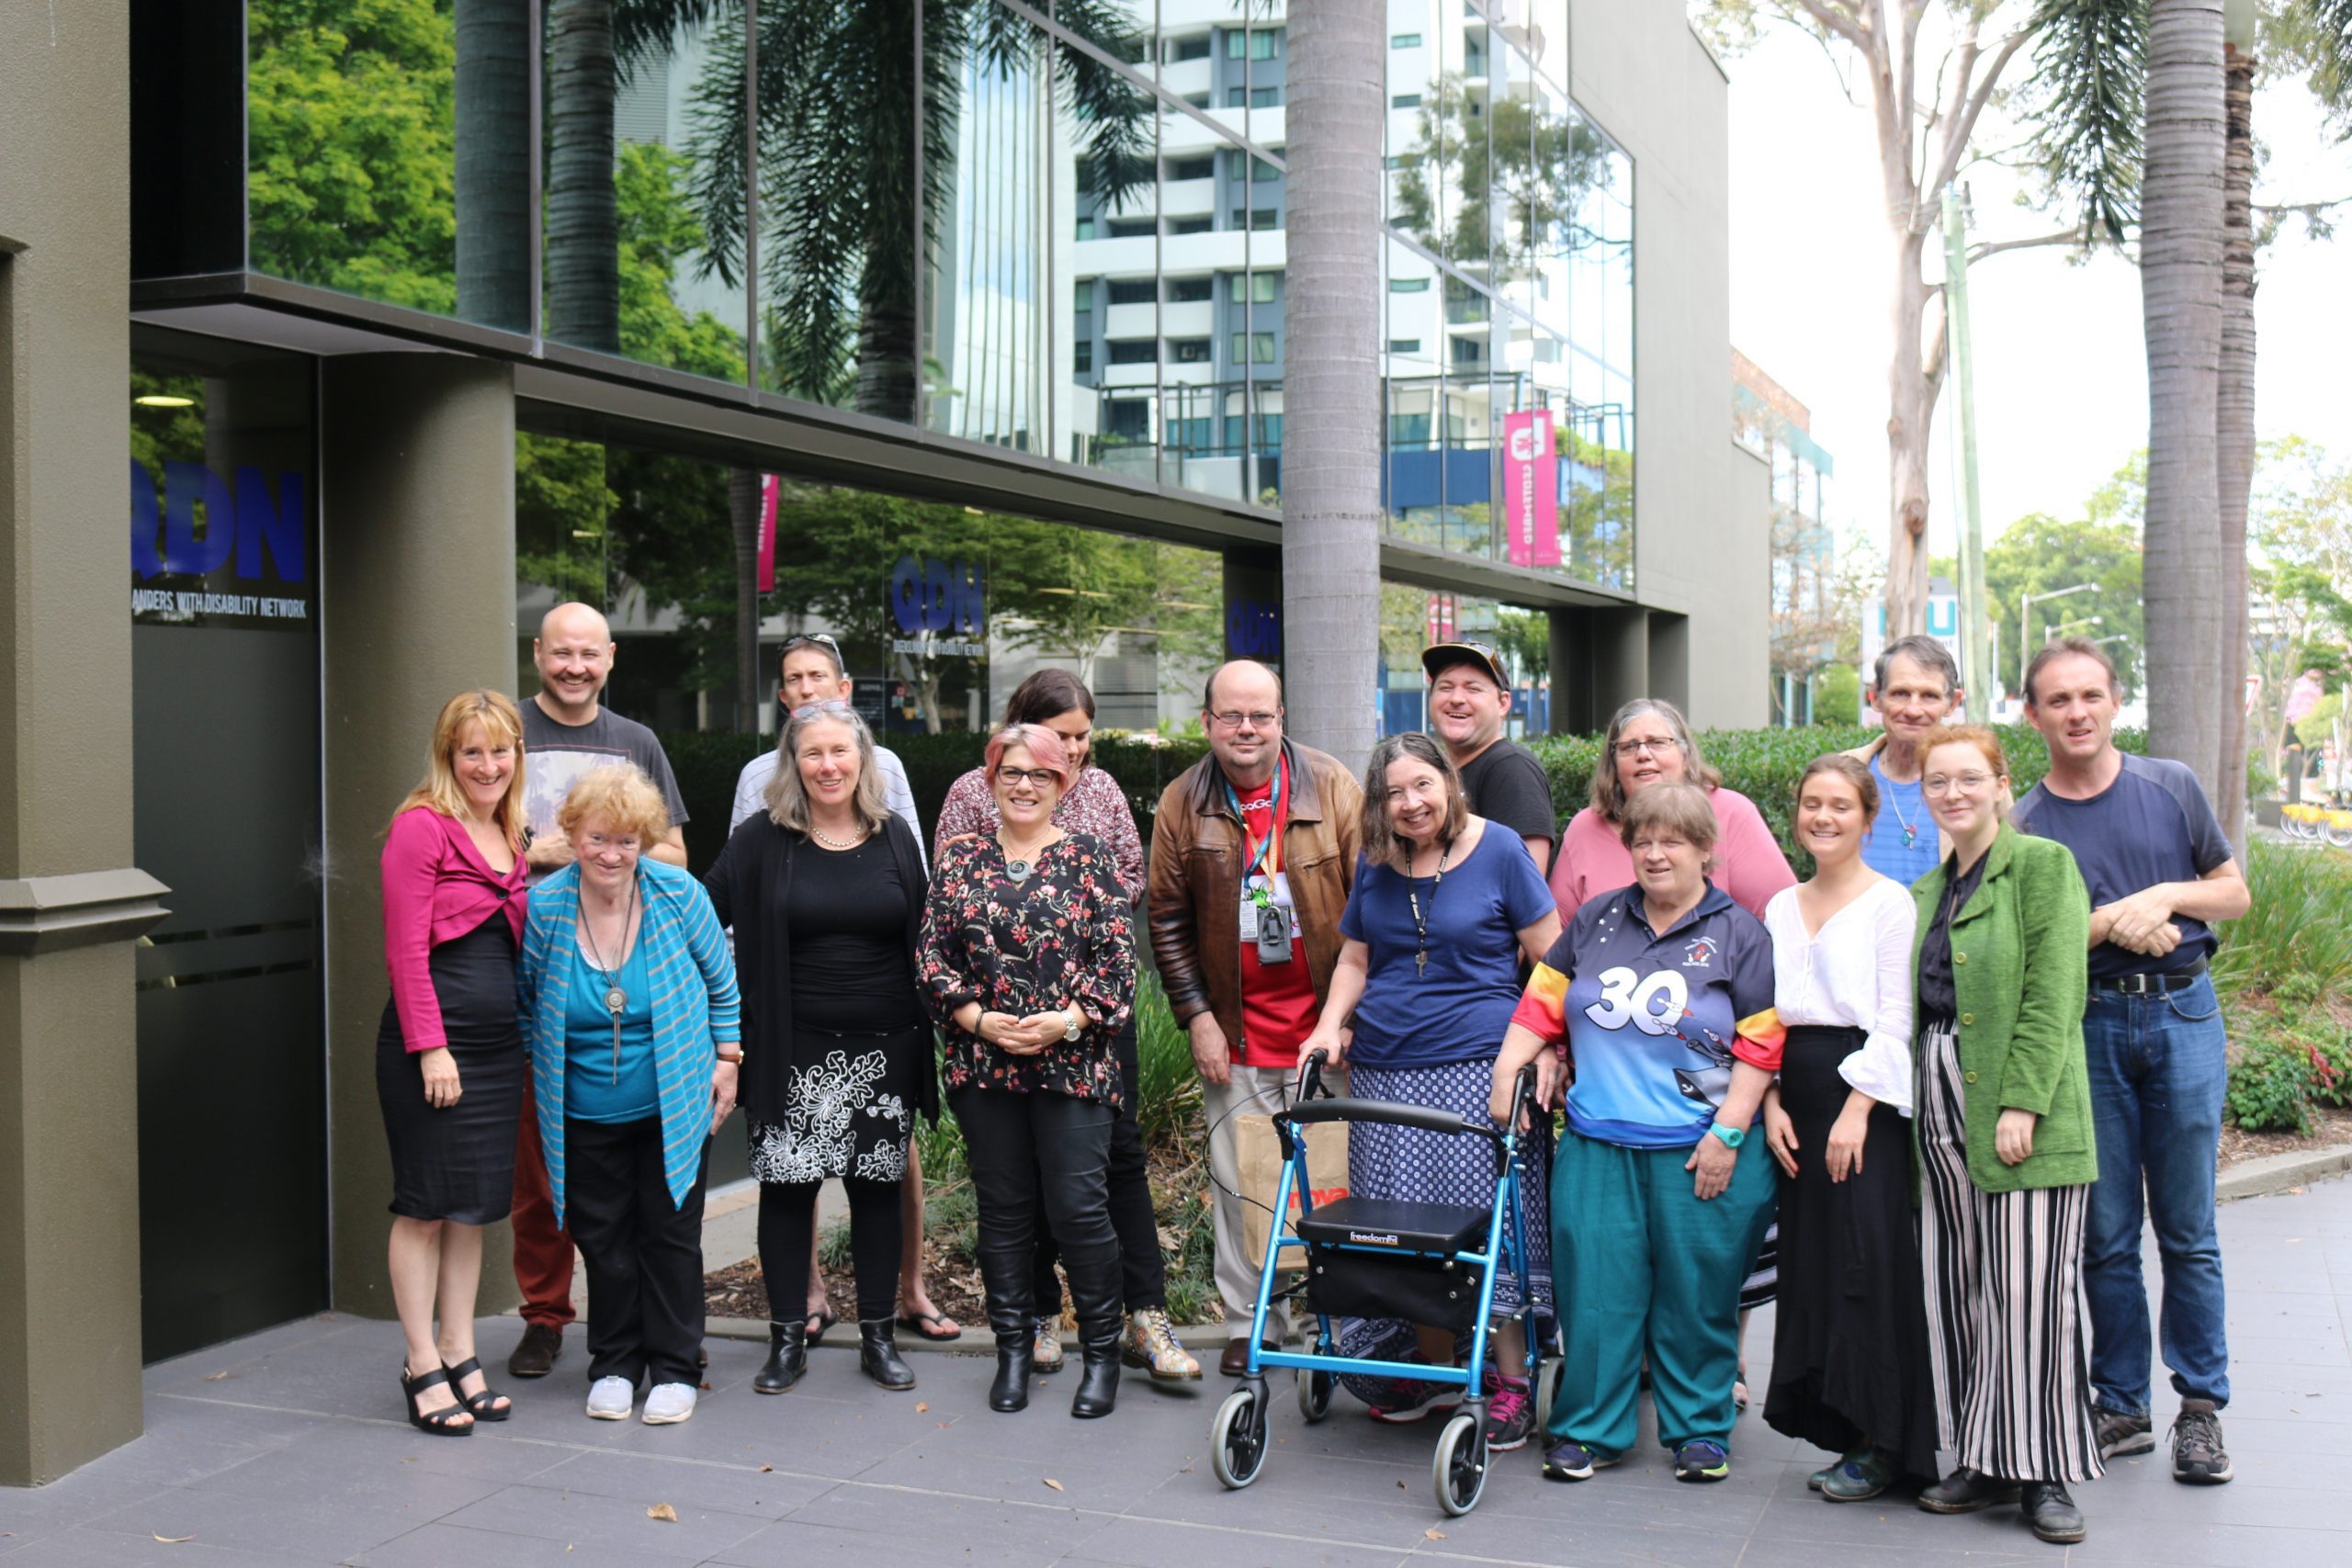 A group of people, some with disabilities, standing in a group outside QDN in the city.